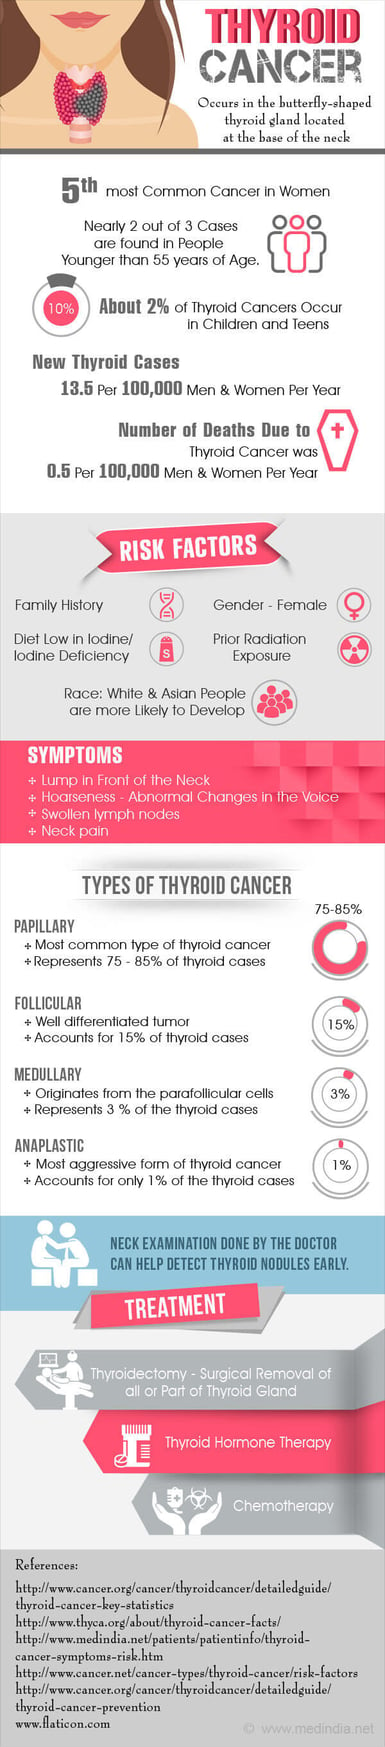 thyroid-cancer-infographic